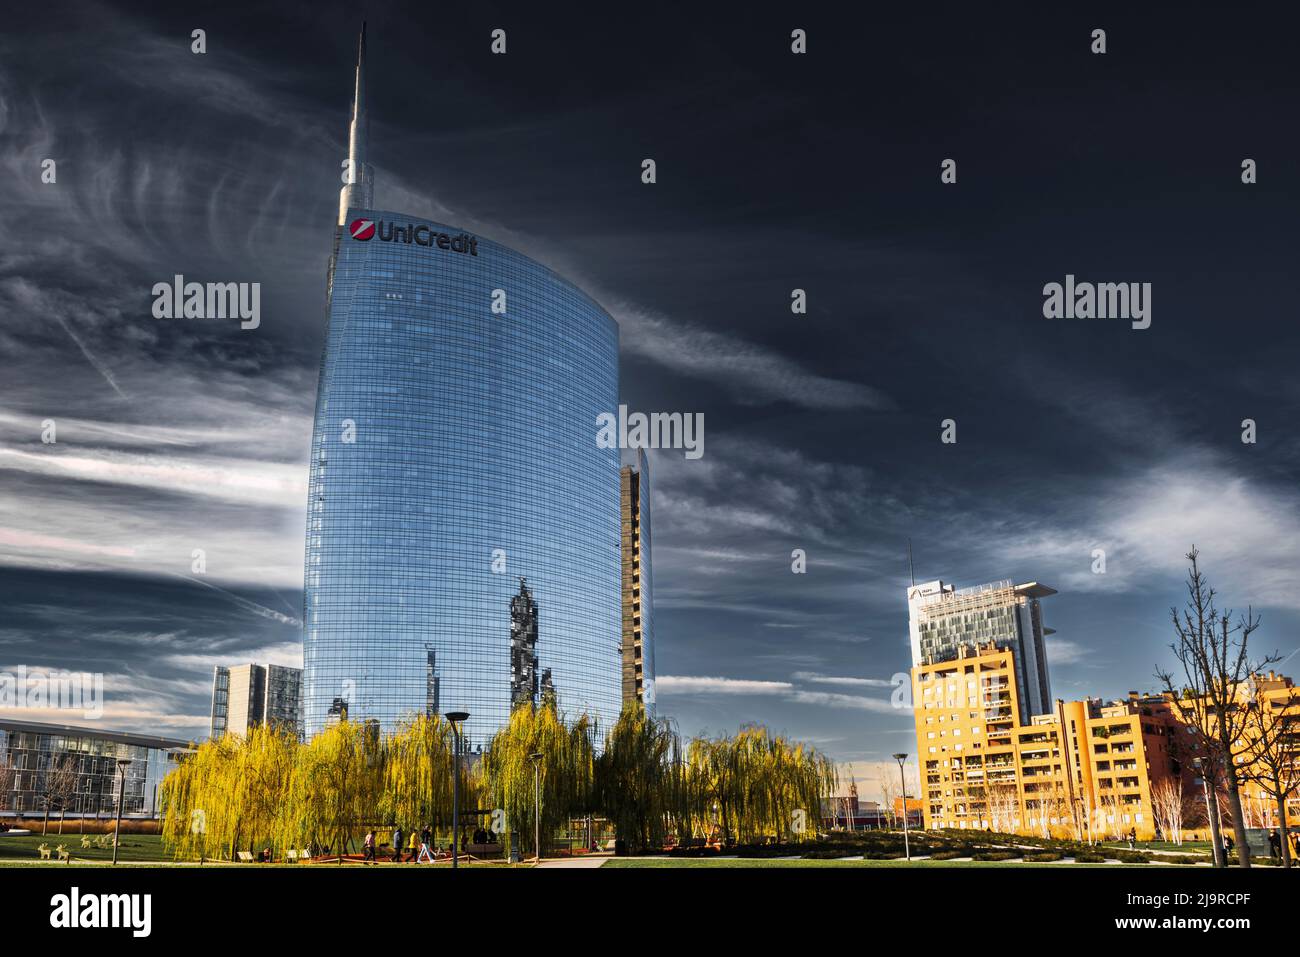 The Unicredit bank skyscraper stands out against a beautiful sky. Modern architecture in Milan. Stock Photo